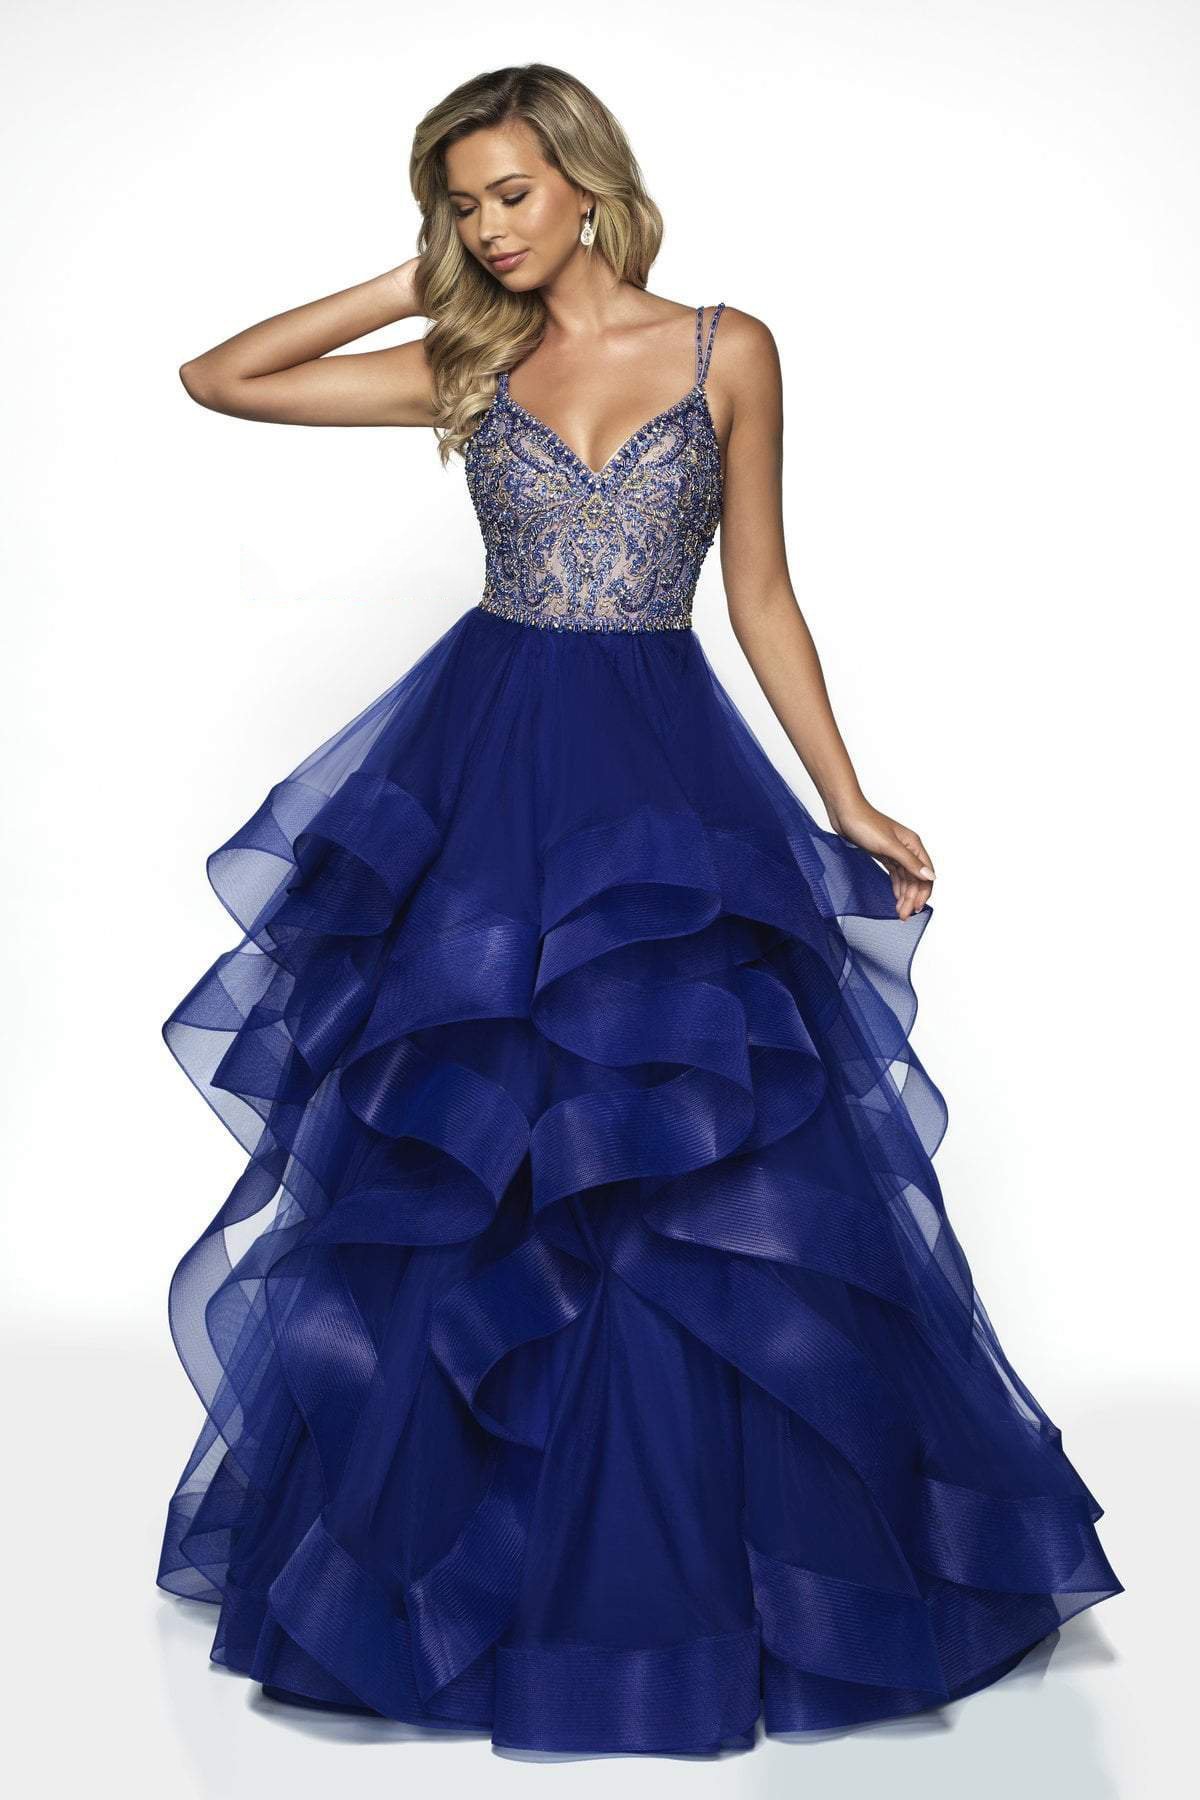 Blush by Alexia Designs - C2007 Beaded V-neck Ruffled Tulle Ballgown In Blue and Neutral